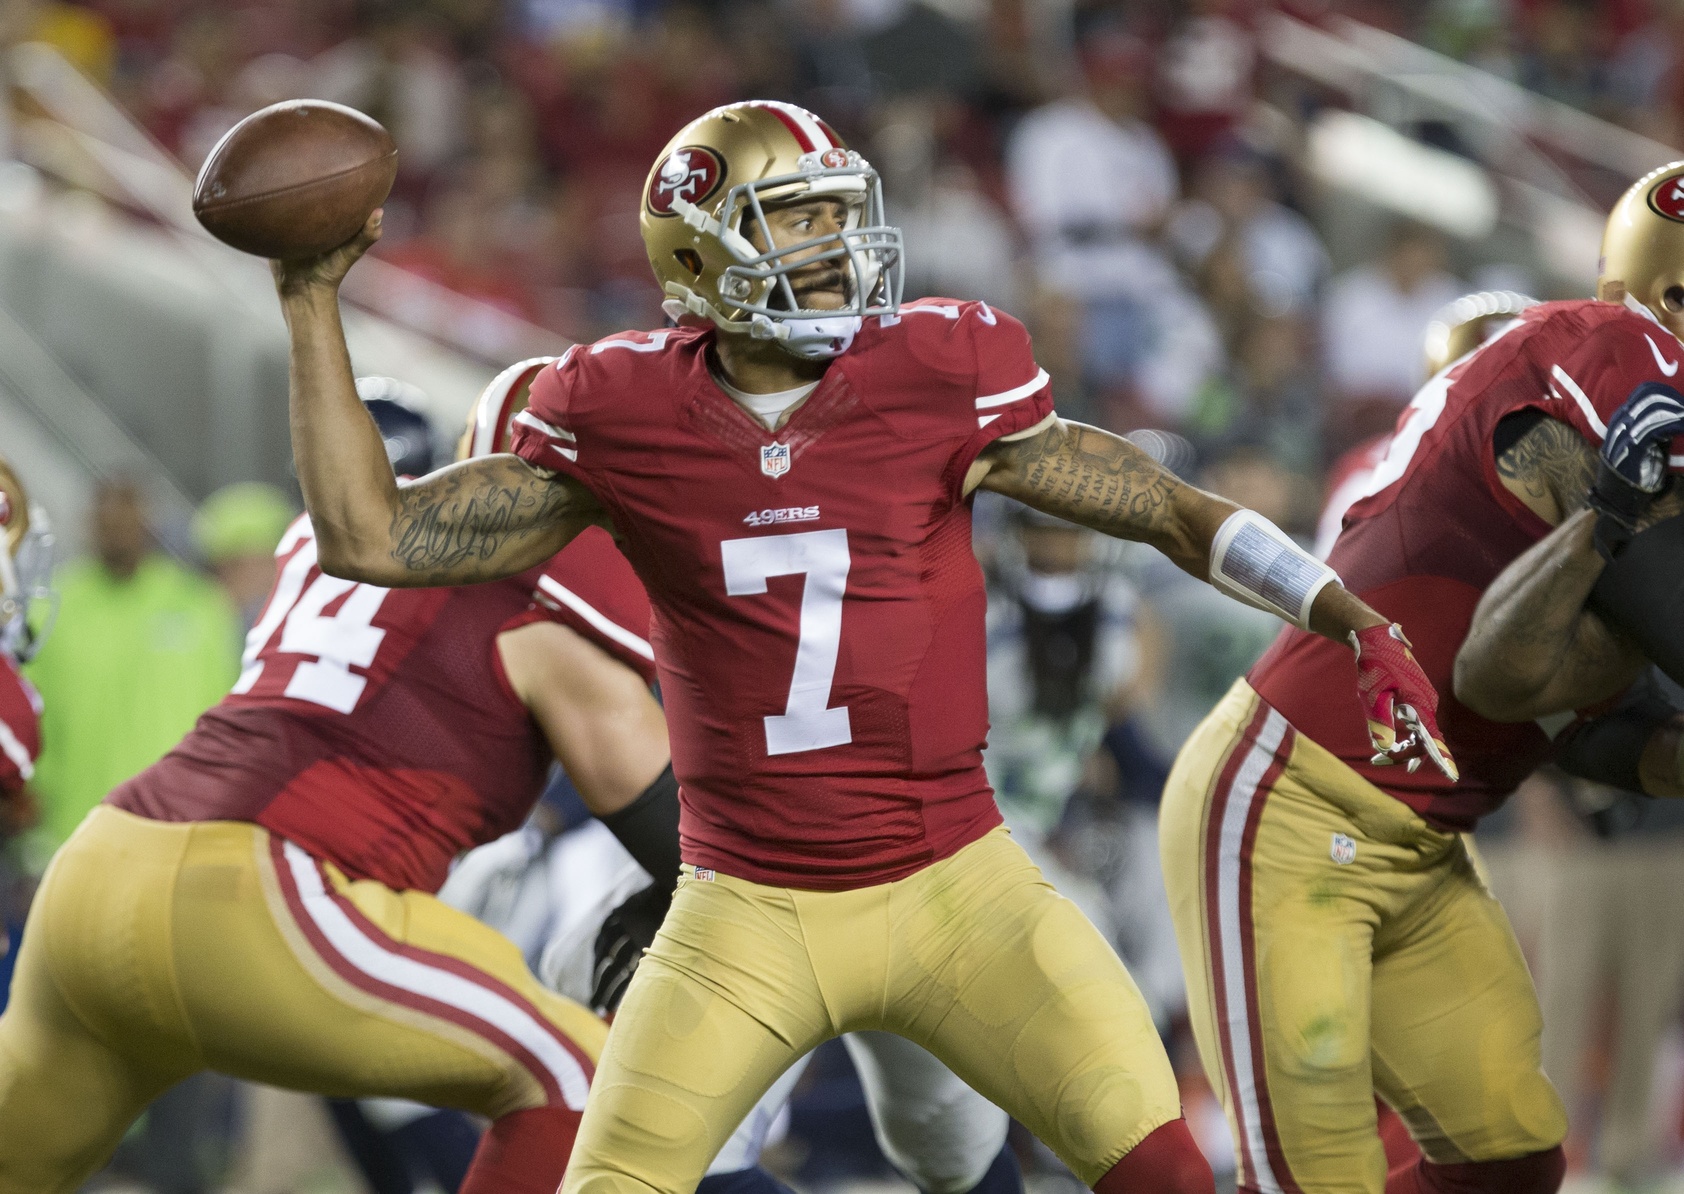  Oct 22, 2015; Santa Clara, CA, USA; San Francisco 49ers quarterback Colin Kaepernick (7) passes the ball against the Seattle Seahawks during the fourth quarter at Levi's Stadium. The Seattle Seahawks defeated the San Francisco 49ers 20-3. Mandatory Credit: Kelley L Cox-USA TODAY Sports